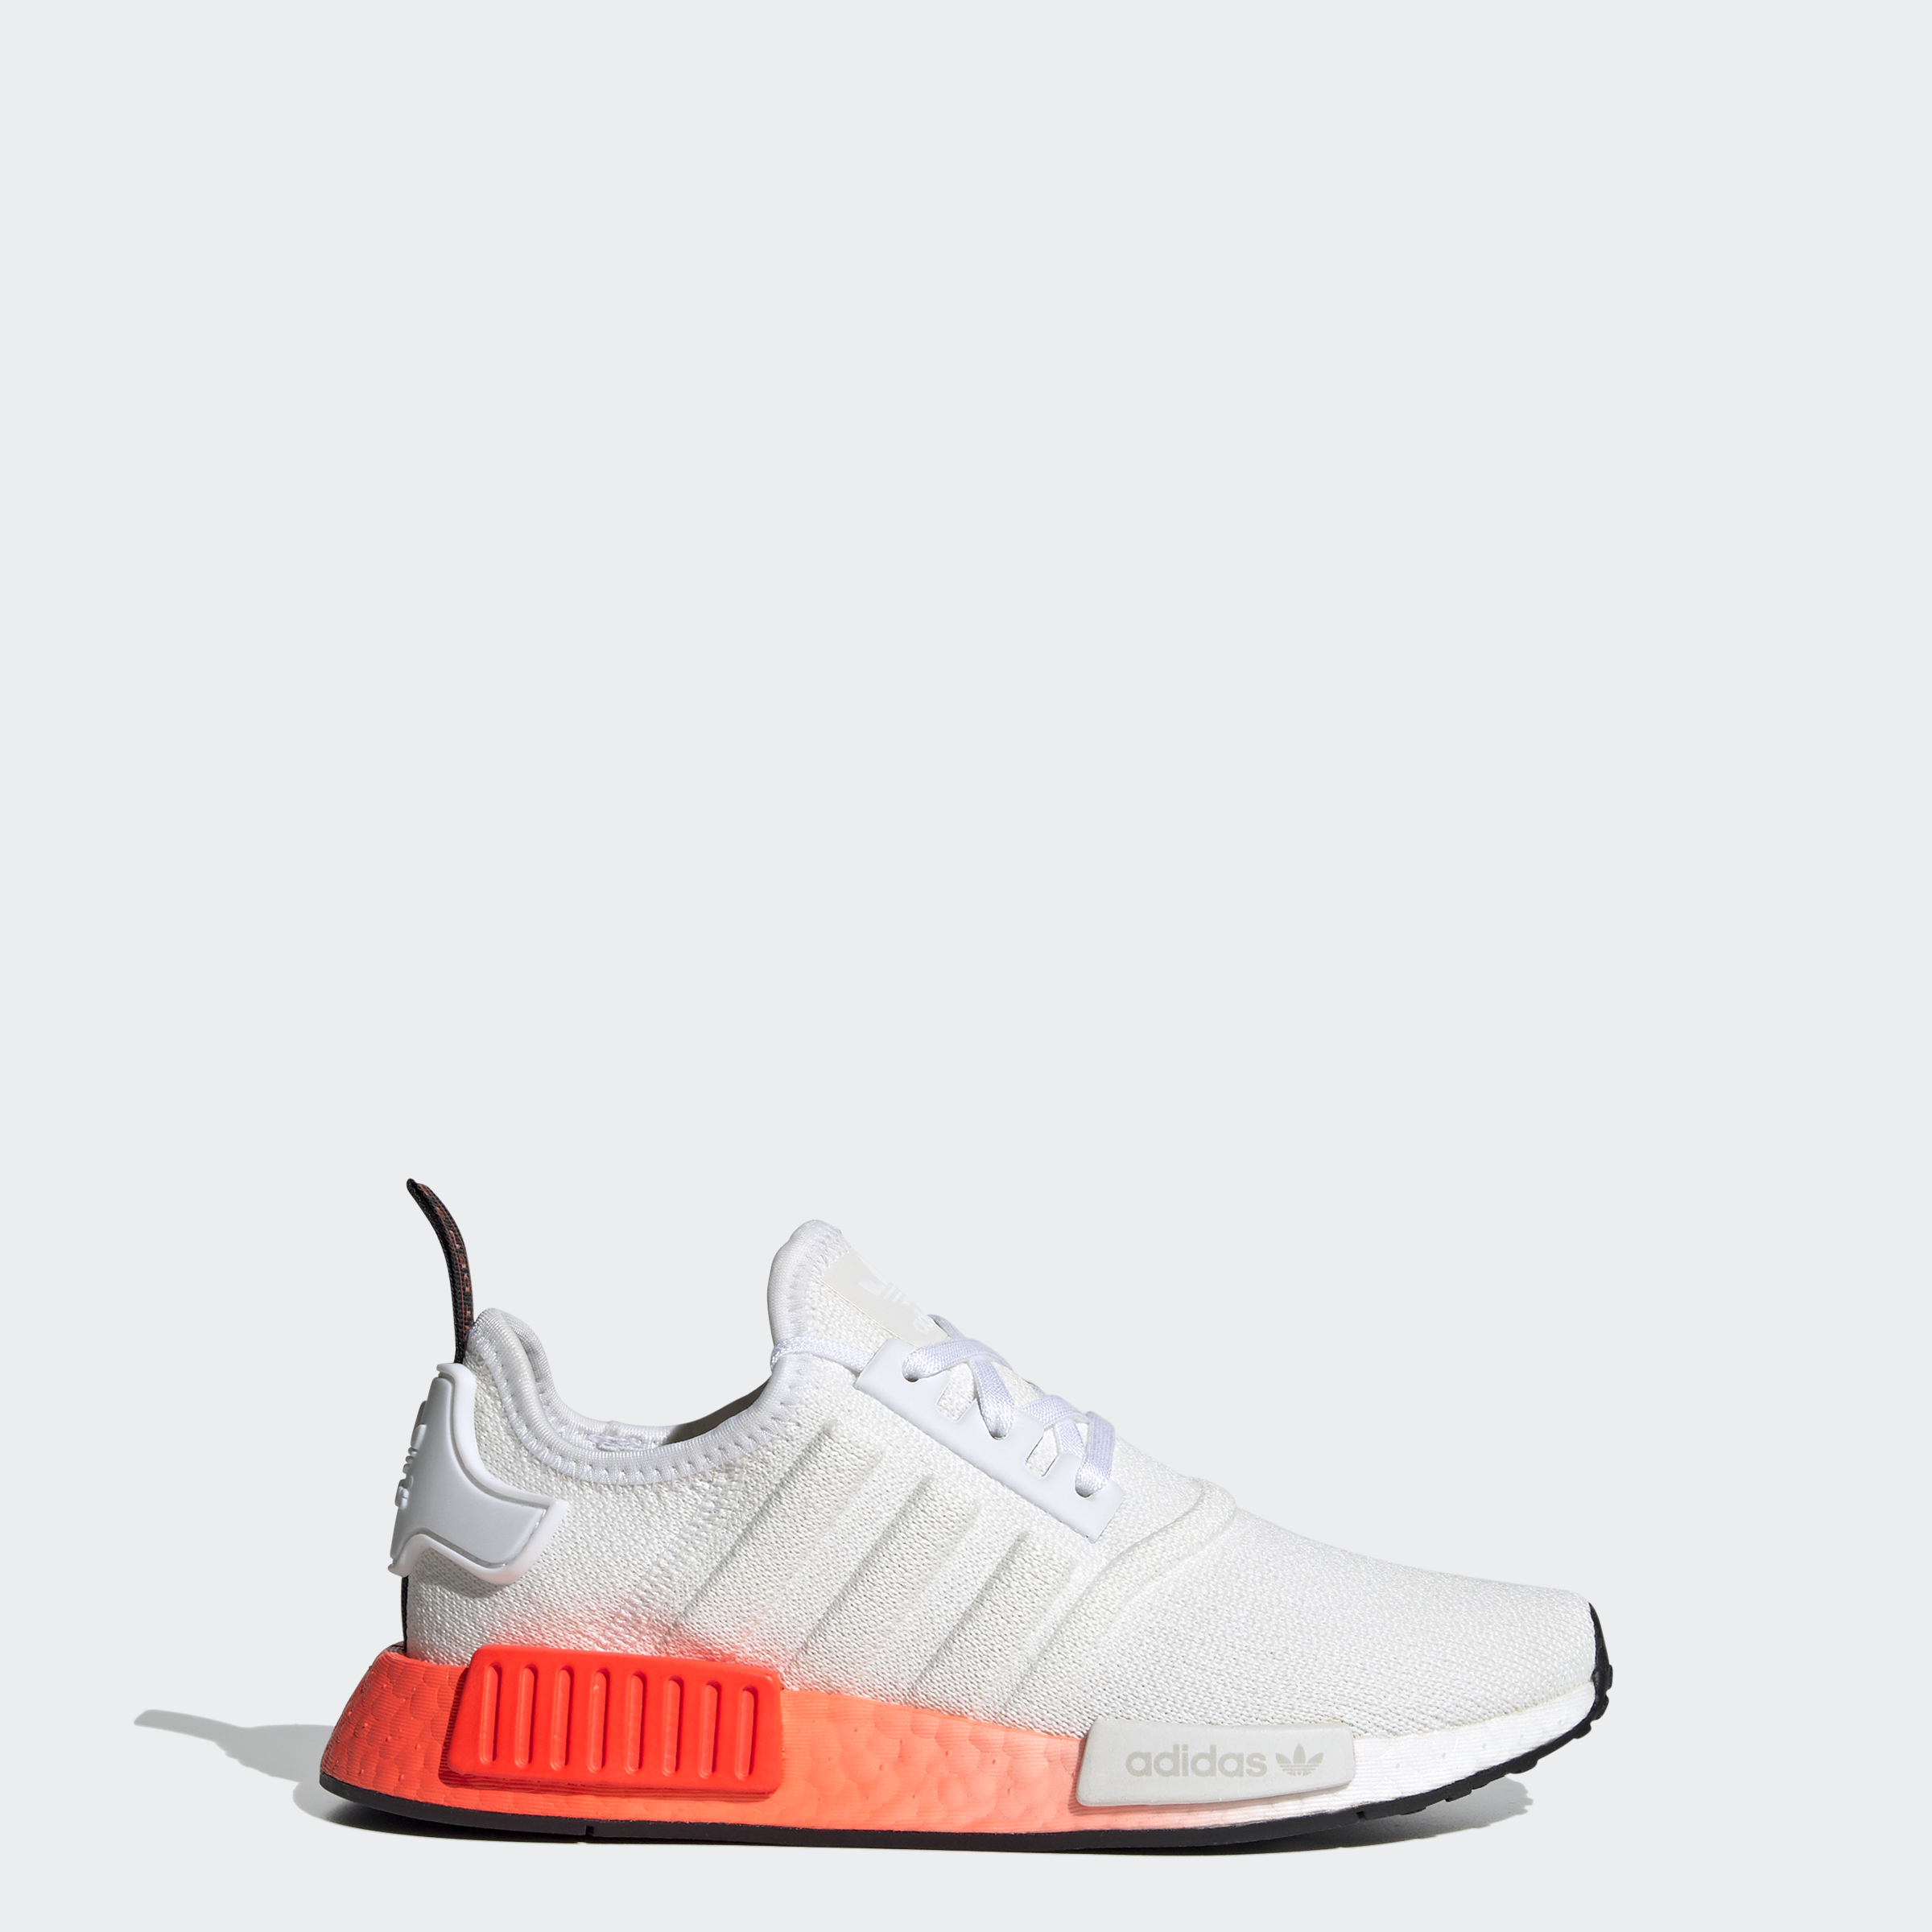 nmd_r1 shoes boys